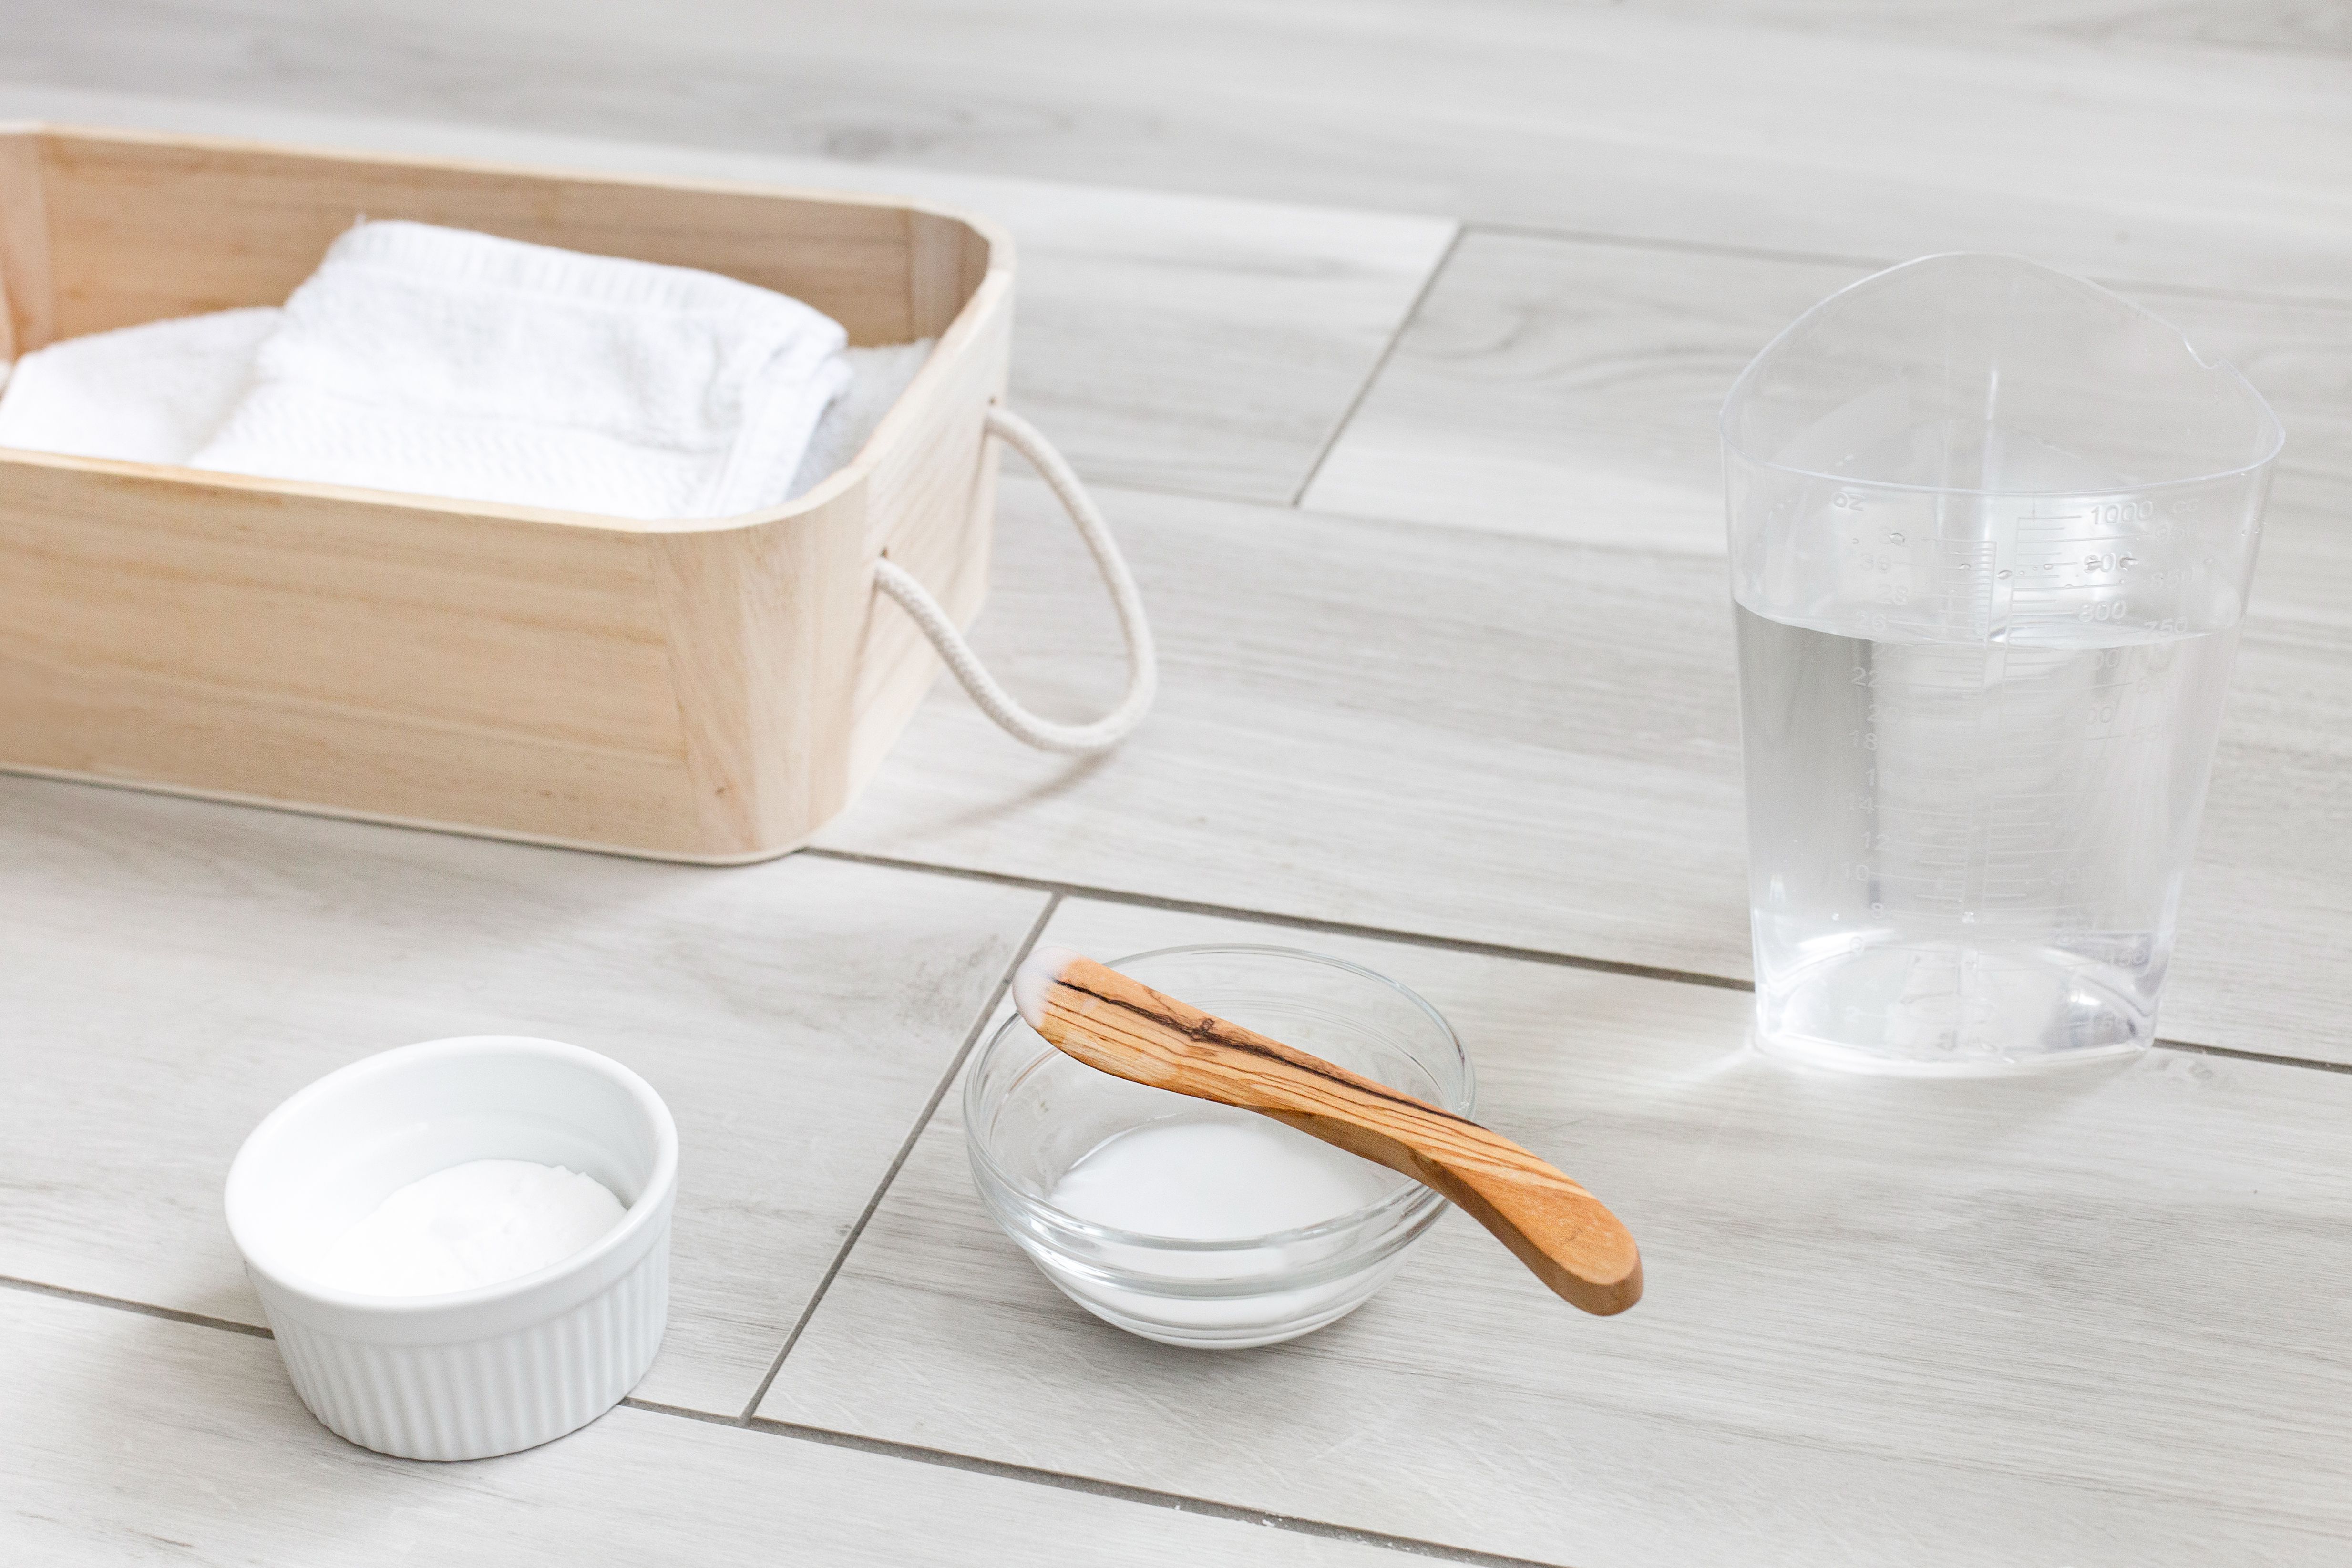 How to Use Baking Soda for Stain Pre-Treating